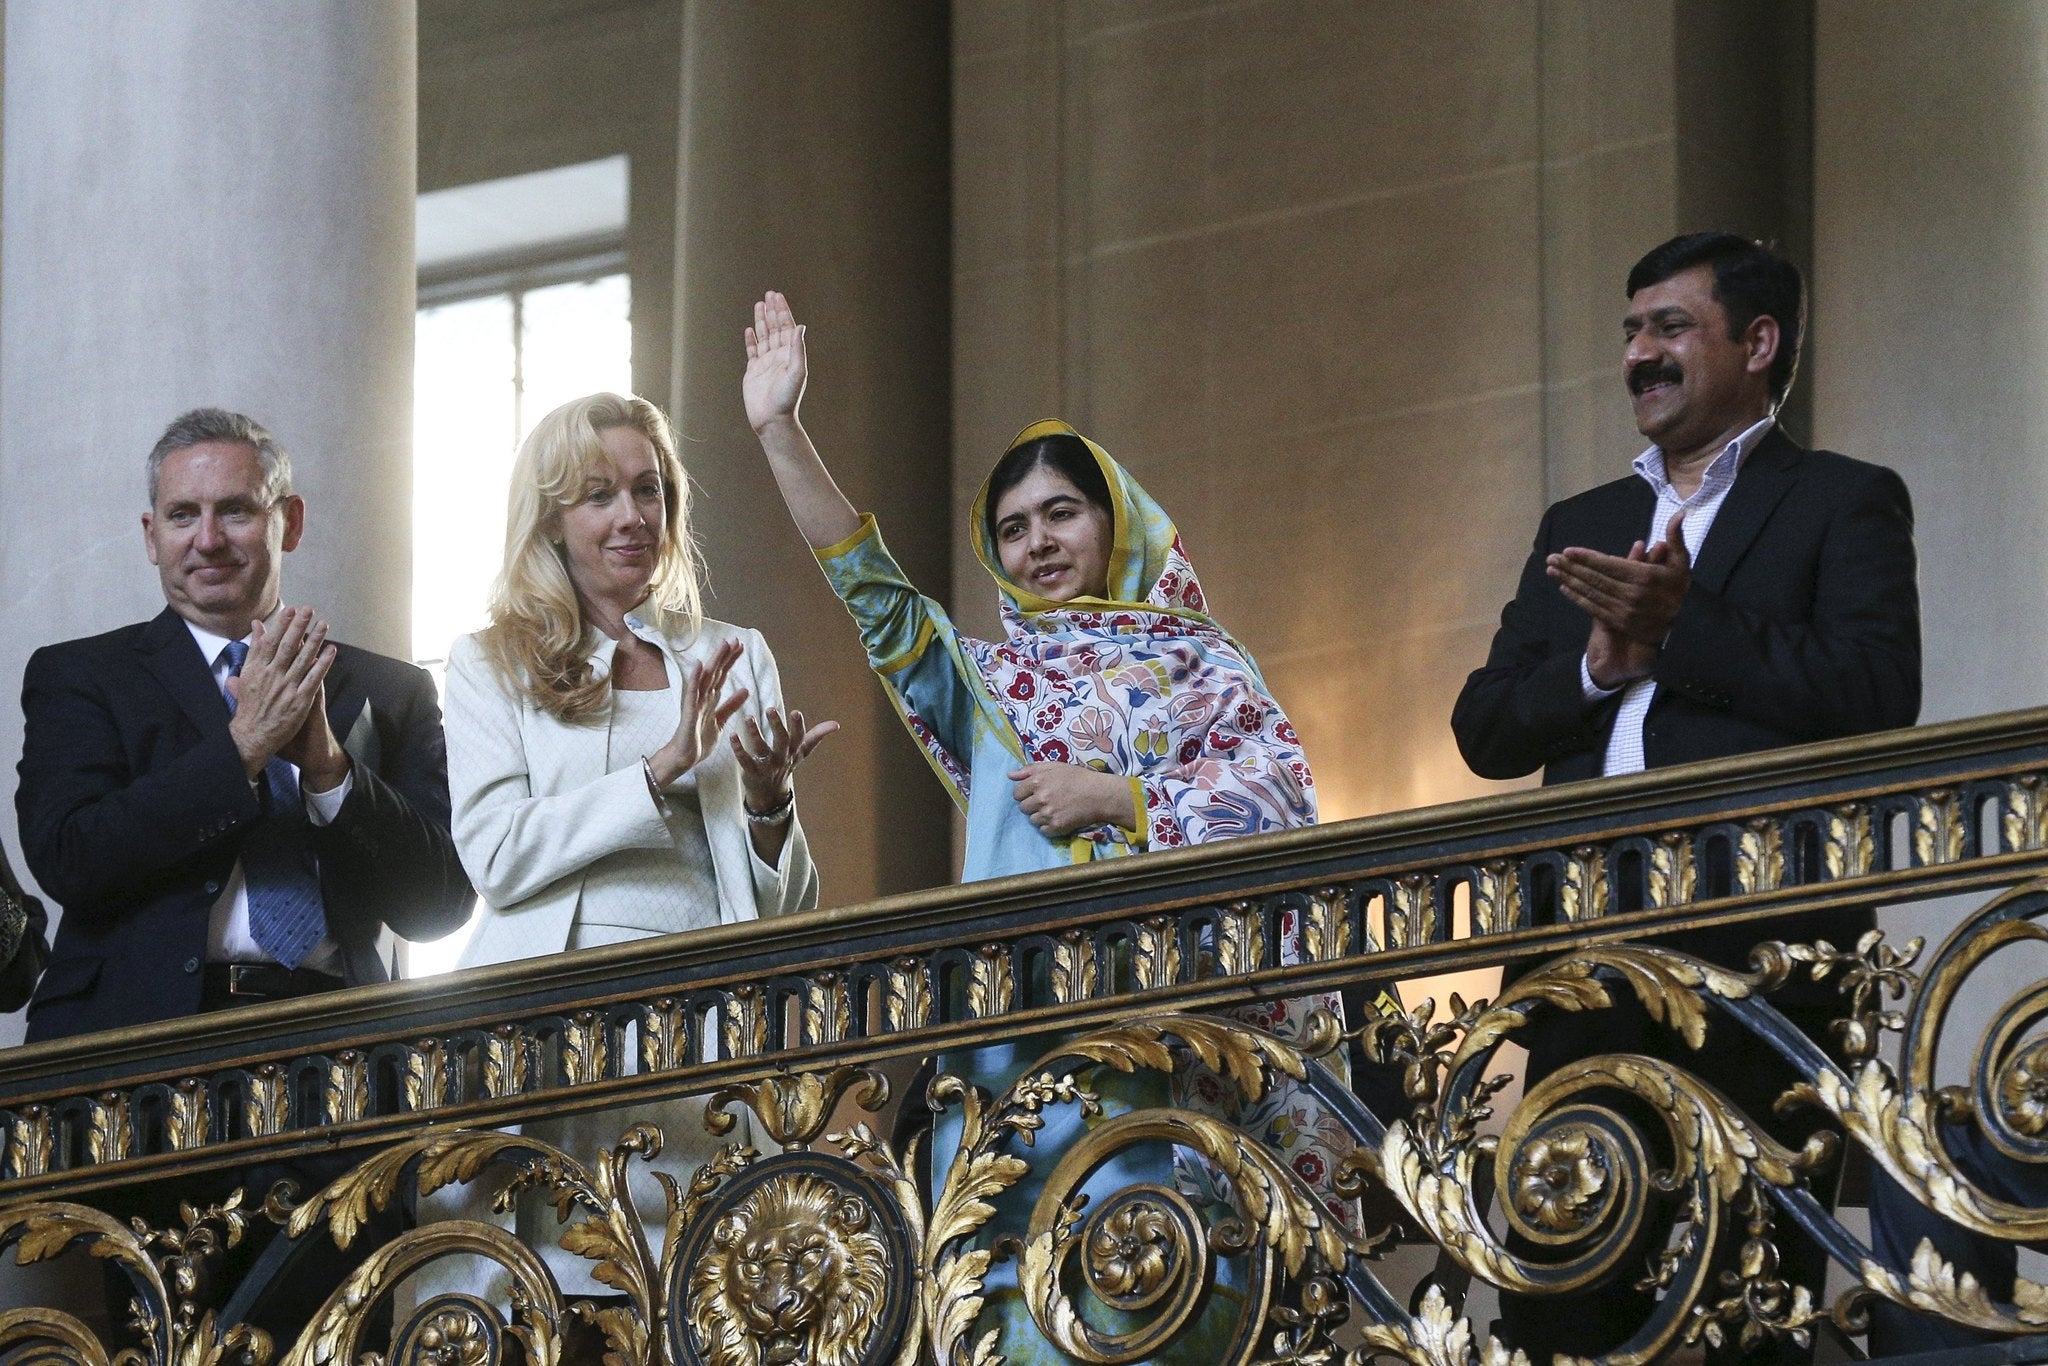 Malala waves after being mentioned in UN Secretary General's speech, on June 26, during a ceremony commemorating the 70th anniversary of the signing of the UN Charter in California (REUTERS/Elijah Nouvelage)